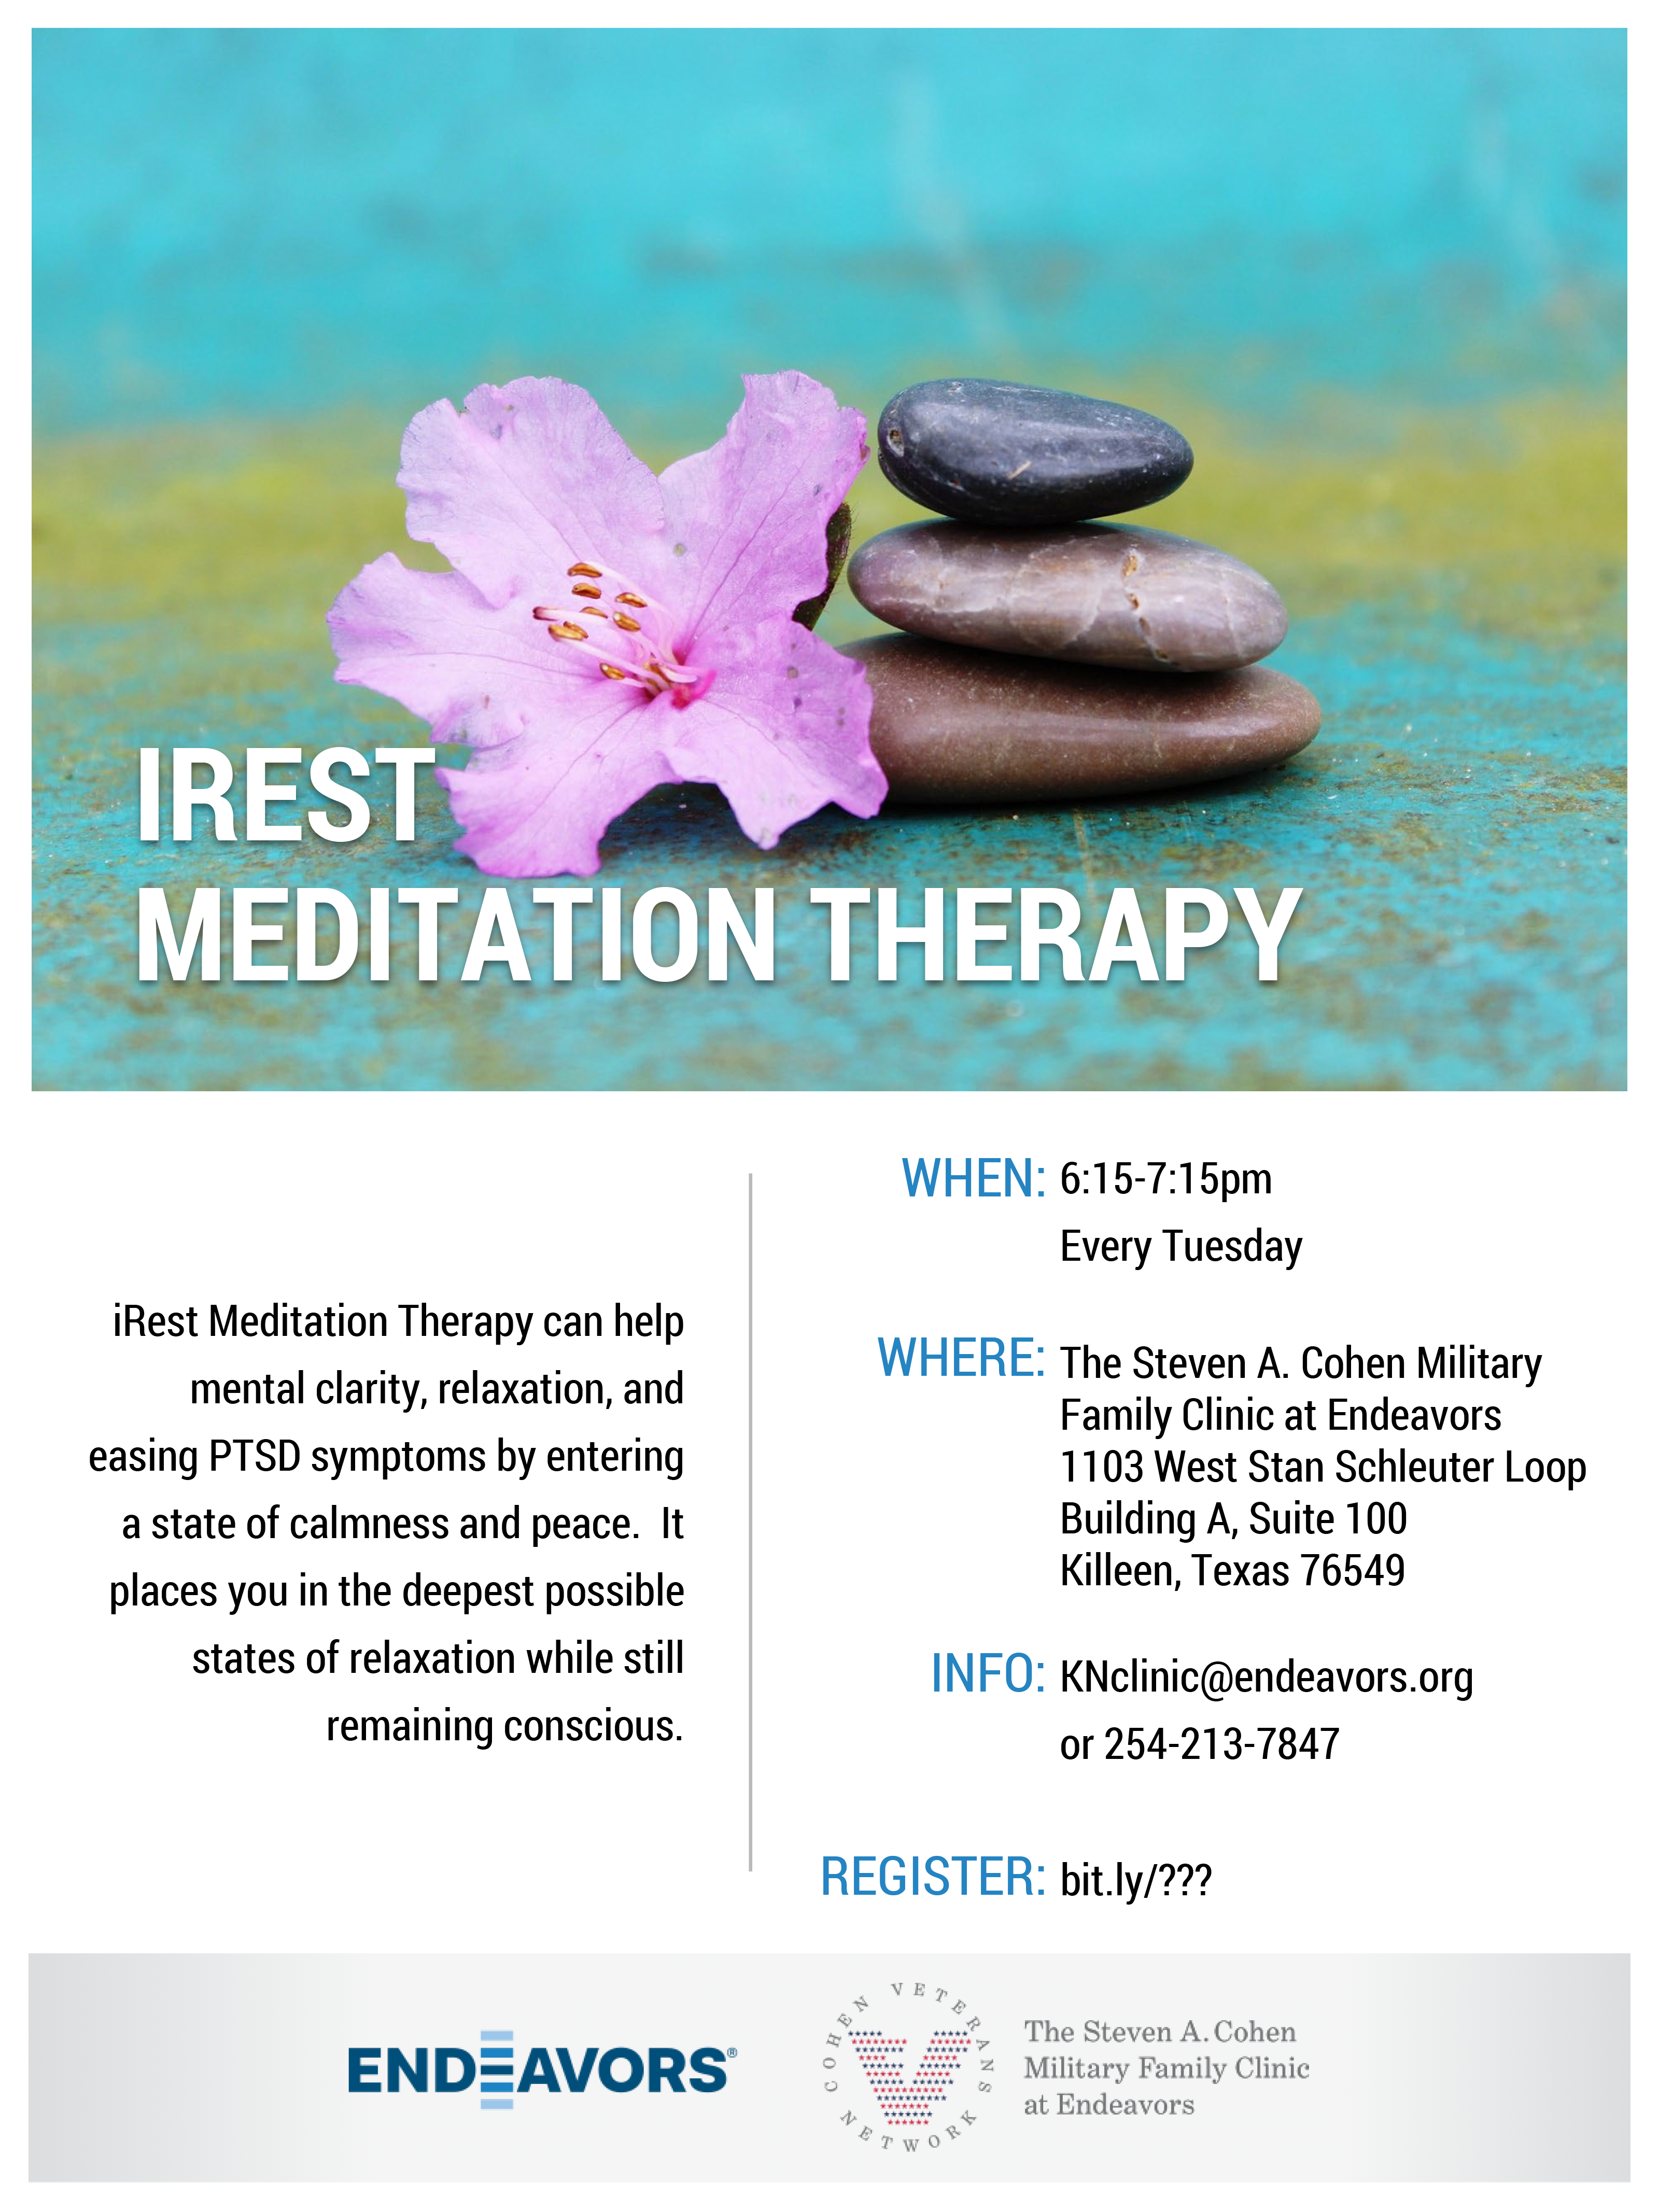 iRest Meditation Therapy